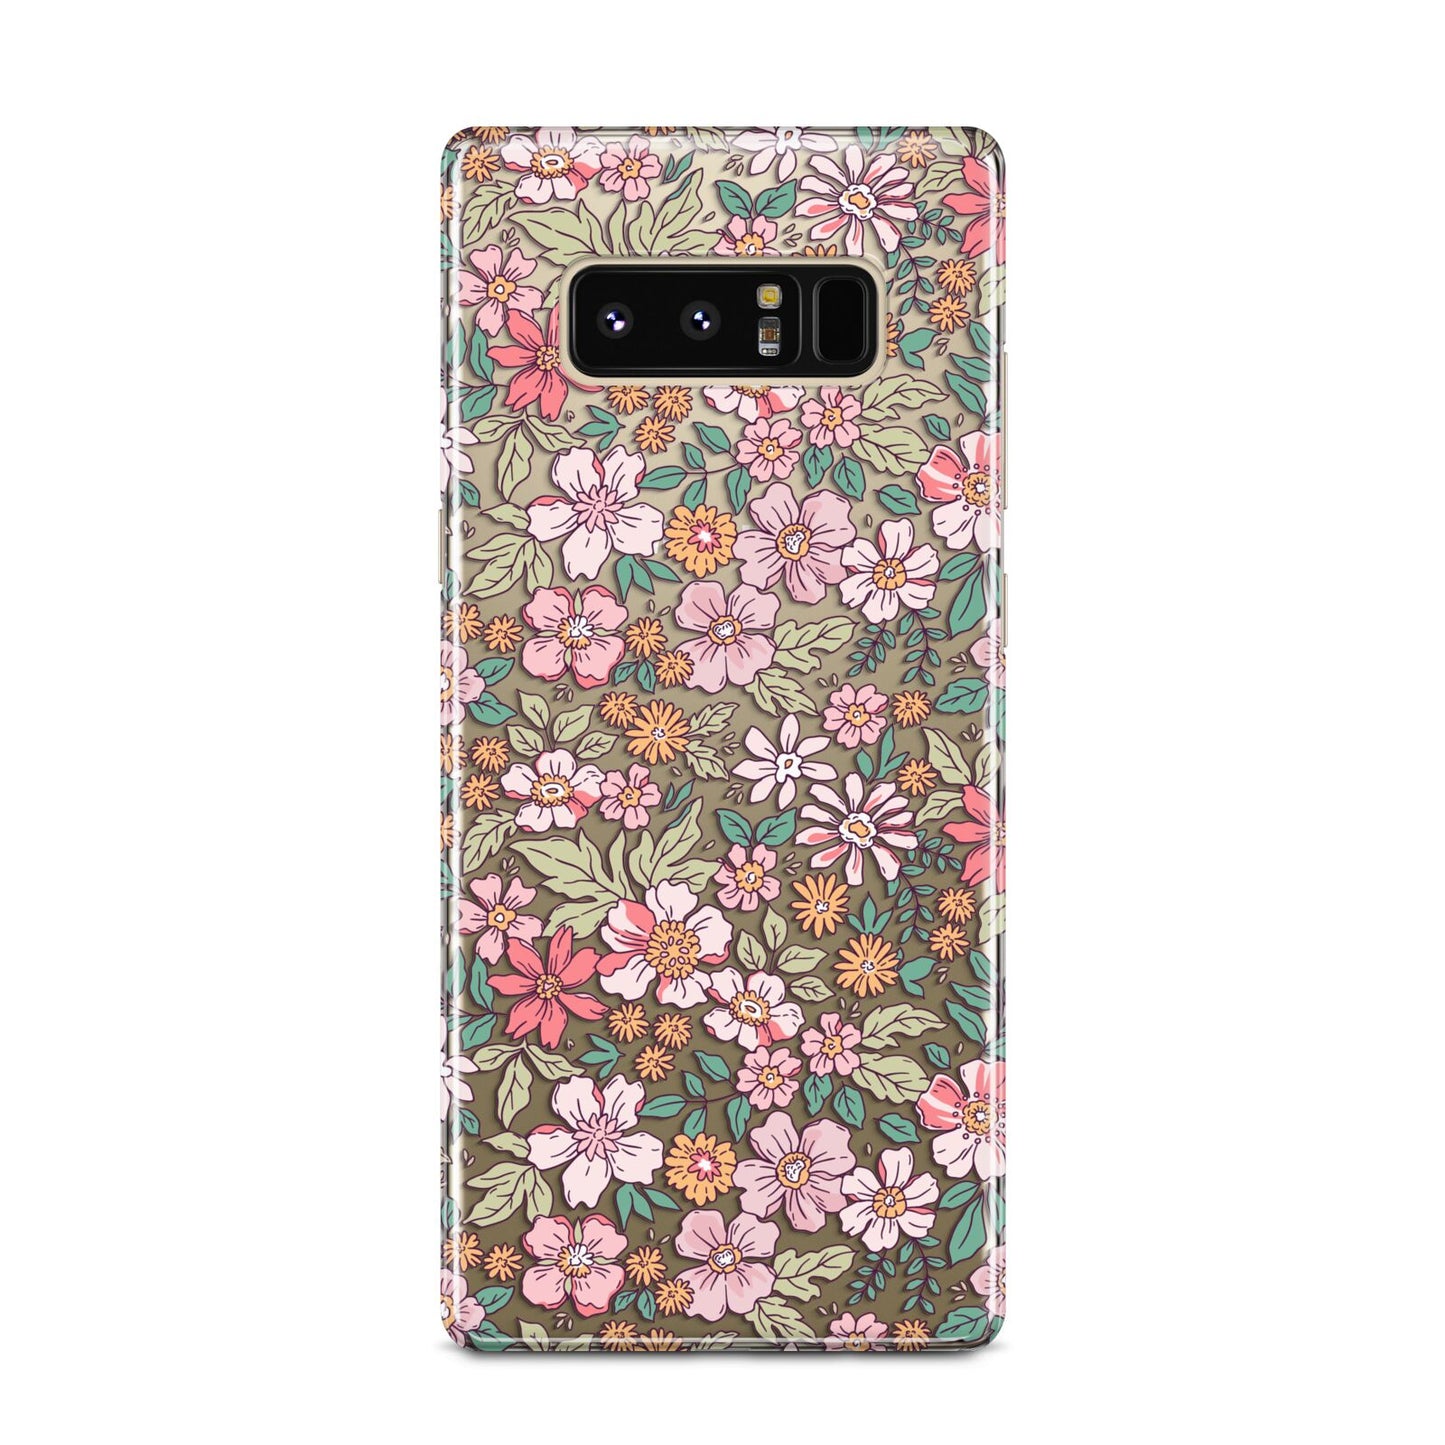 Small Floral Pattern Samsung Galaxy Note 8 Case